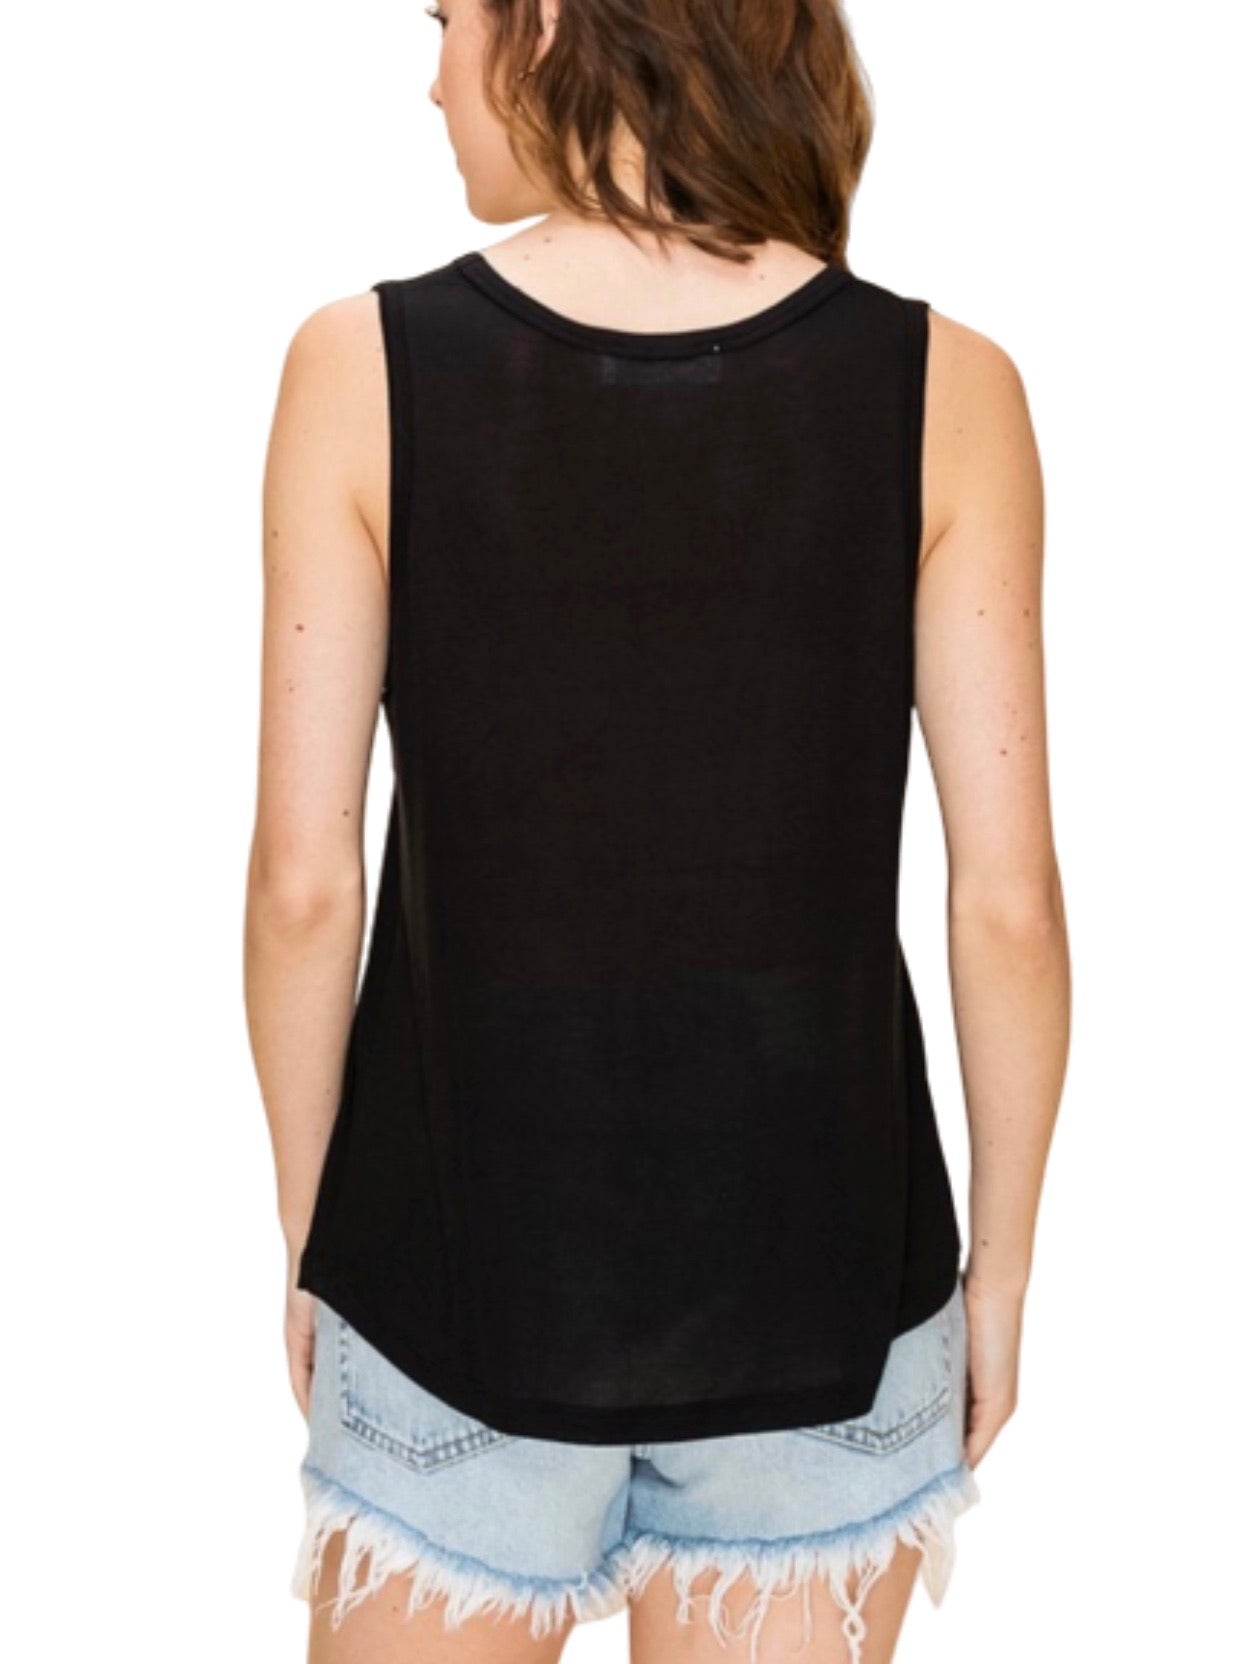 New ! The Basically Everything Sleeveless Top - Glamco Boutique 